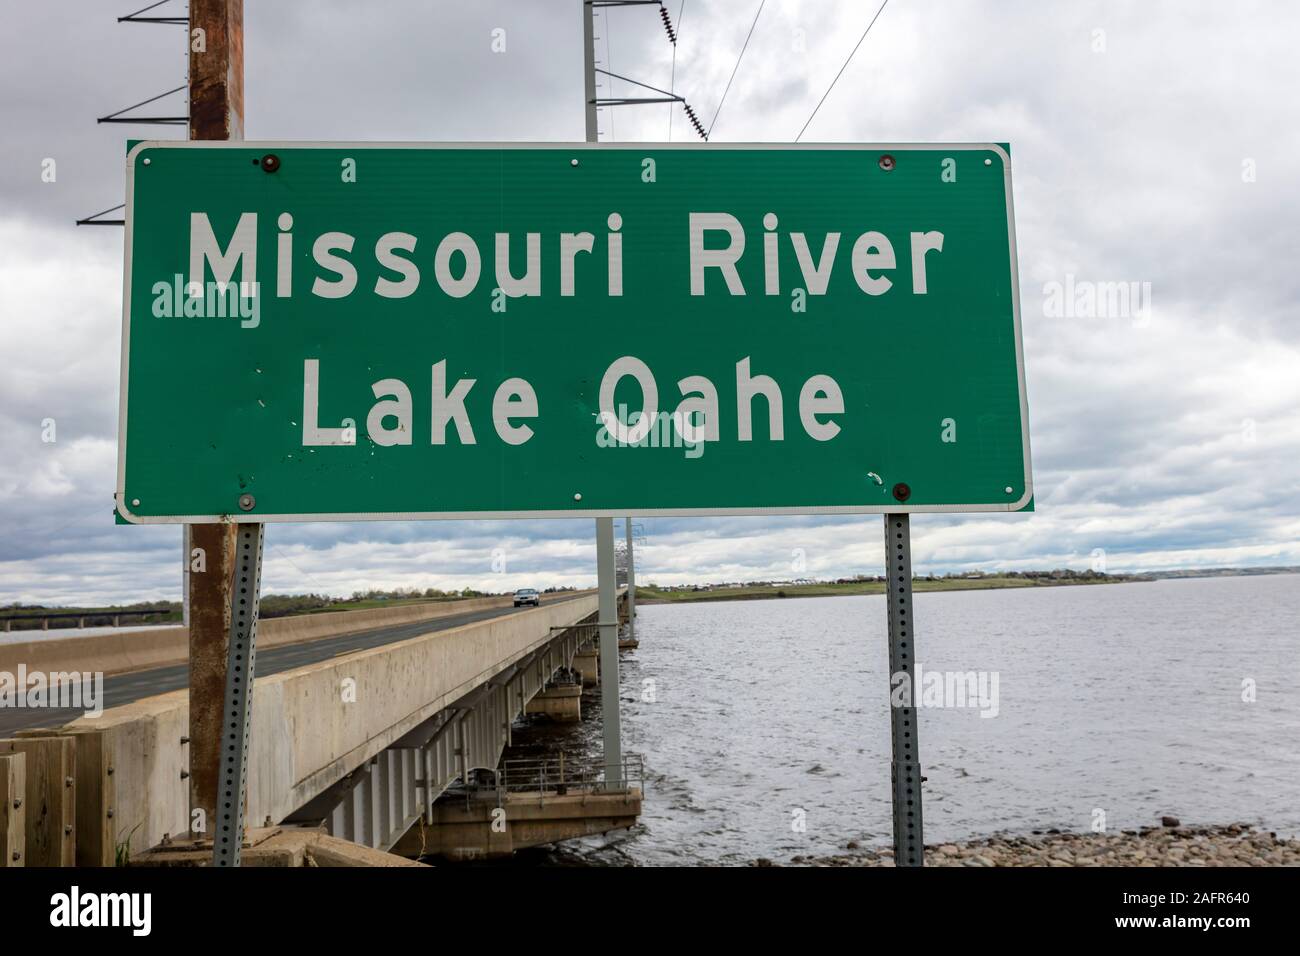 MAY 19 2019, USA - Historic old Lincoln Highway2019, USA - Retracing the Lewis and Clark Expedition - May 14, 1804 - September 23, 1806 Stock Photo